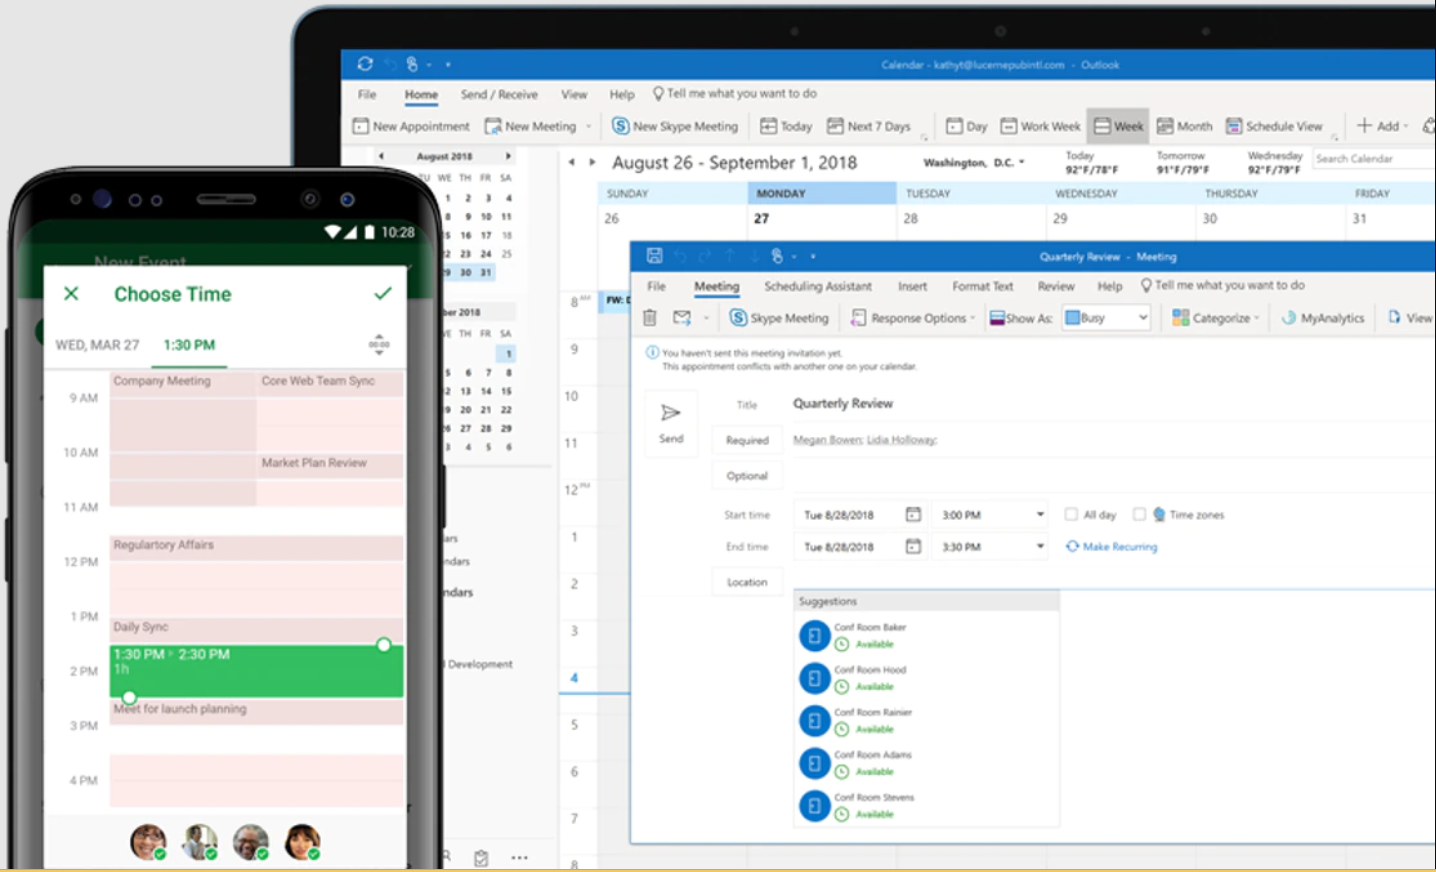 Microsoft Outlook Training Course for meetings, scheduling, and working as part of a team